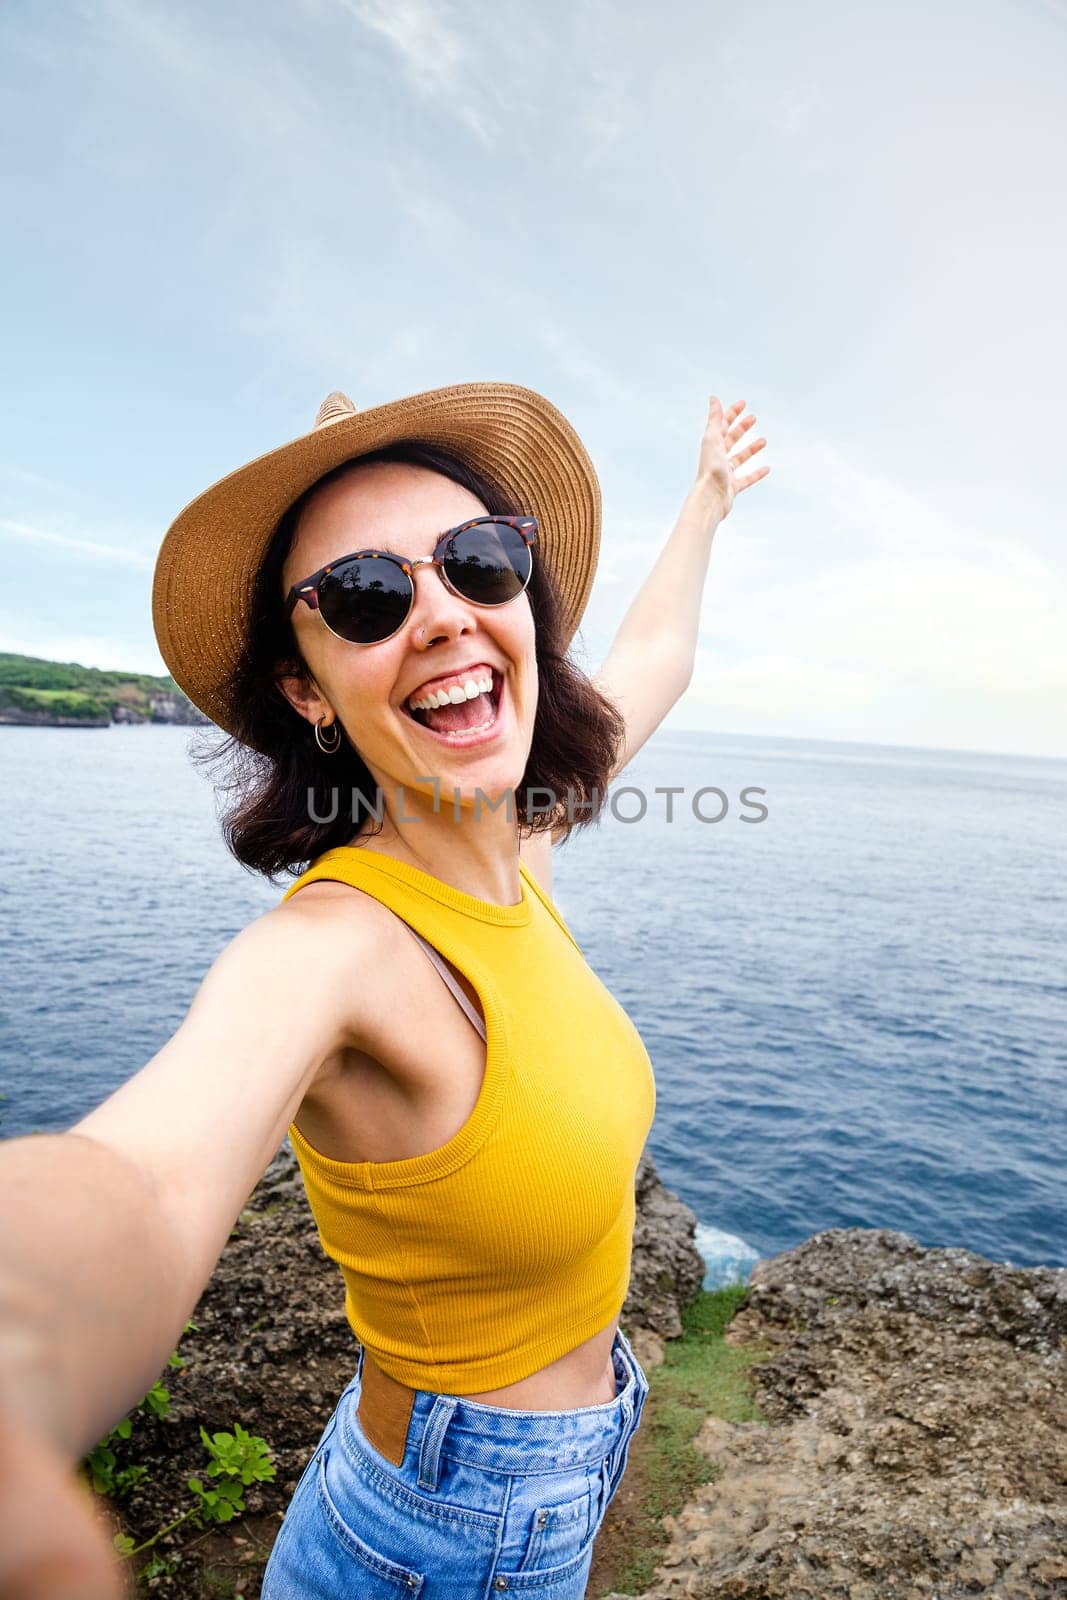 Joyful and smiling young woman traveler taking selfie with phone during summer vacation in seaside location. Vertical. by Hoverstock